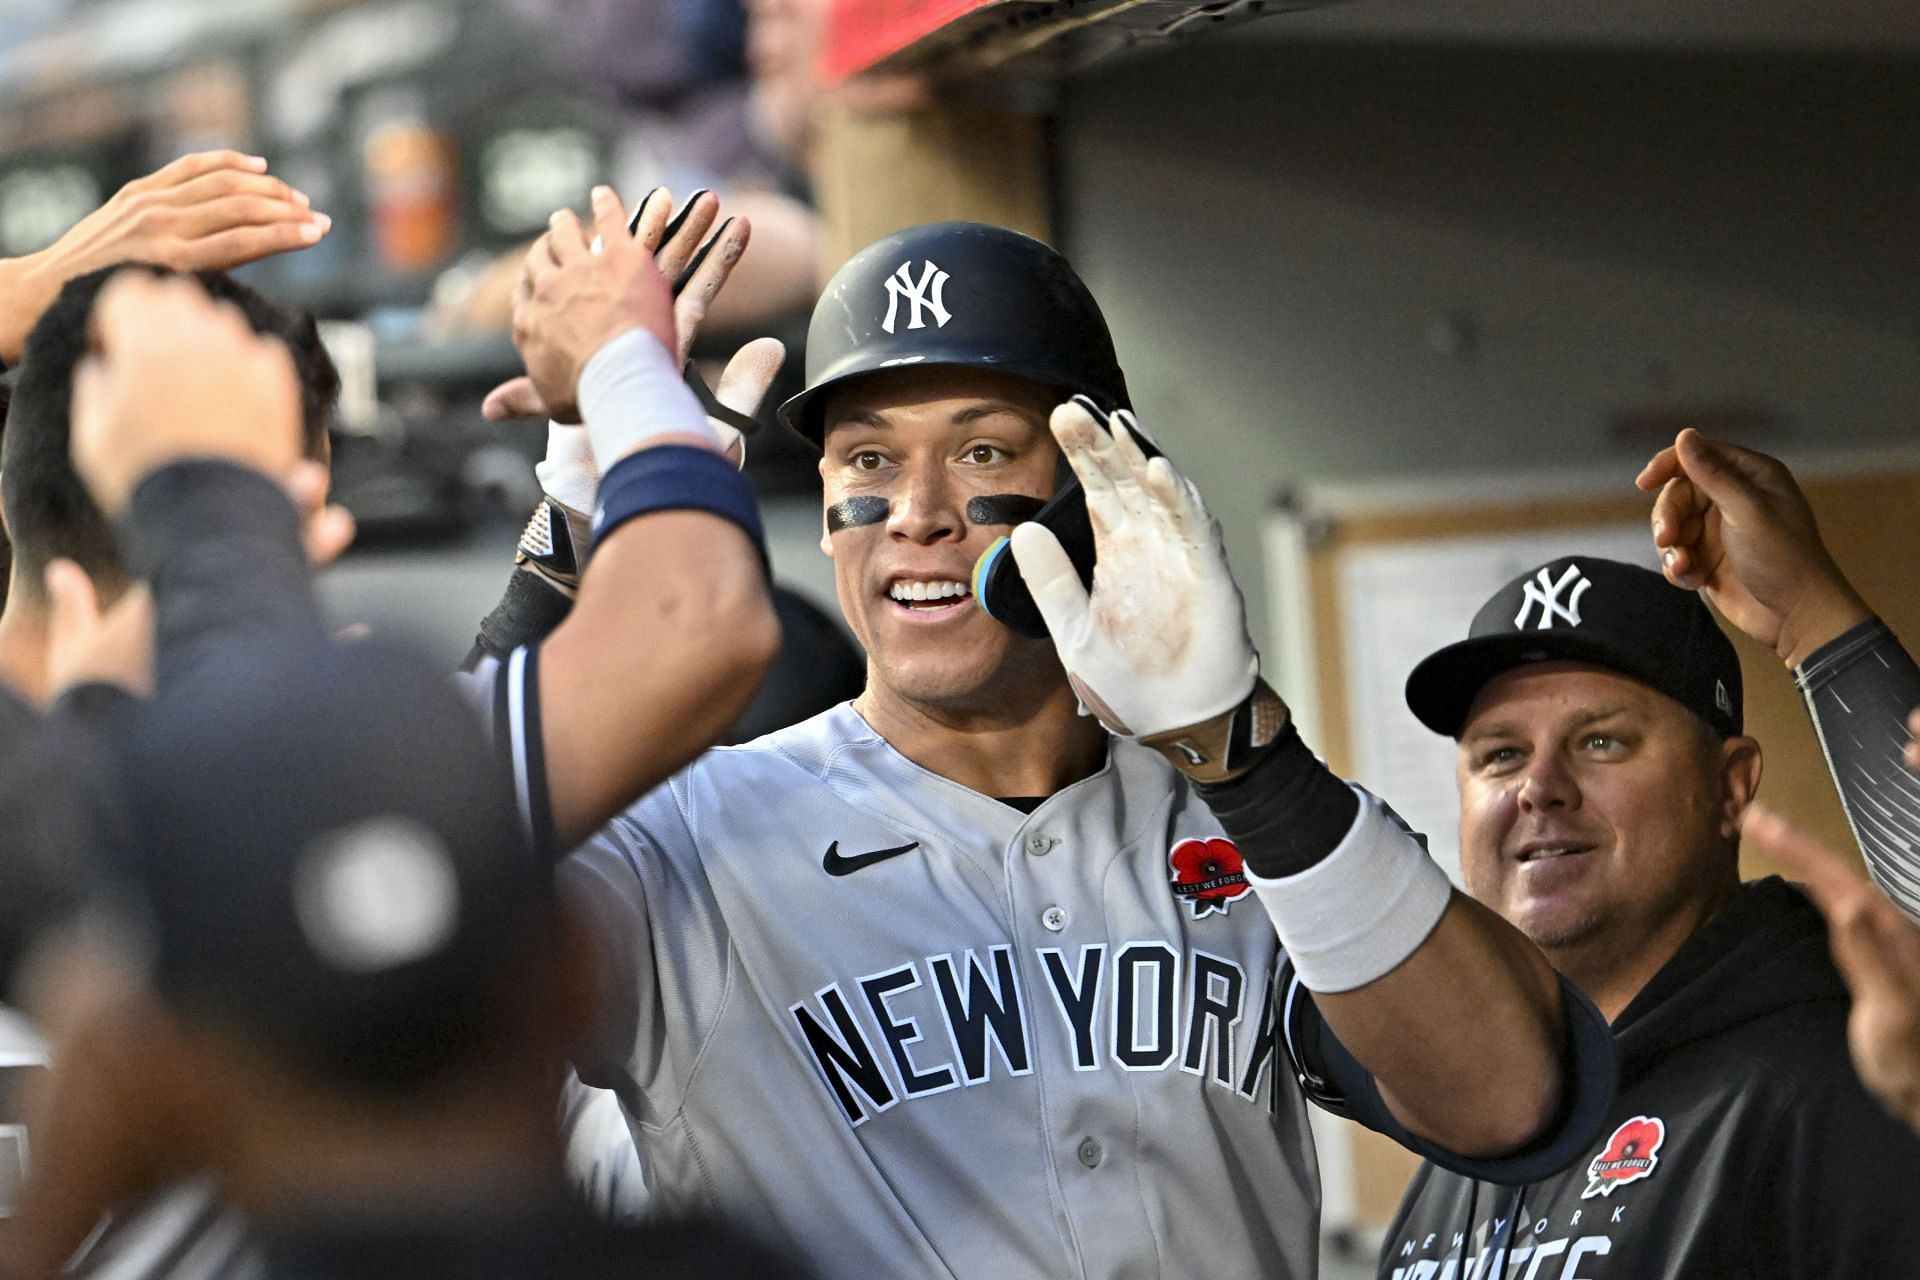 Judge #99 of the New York Yankees celebrates with teammates after hitting a home run during the sixth inning against the Seattle Mariners